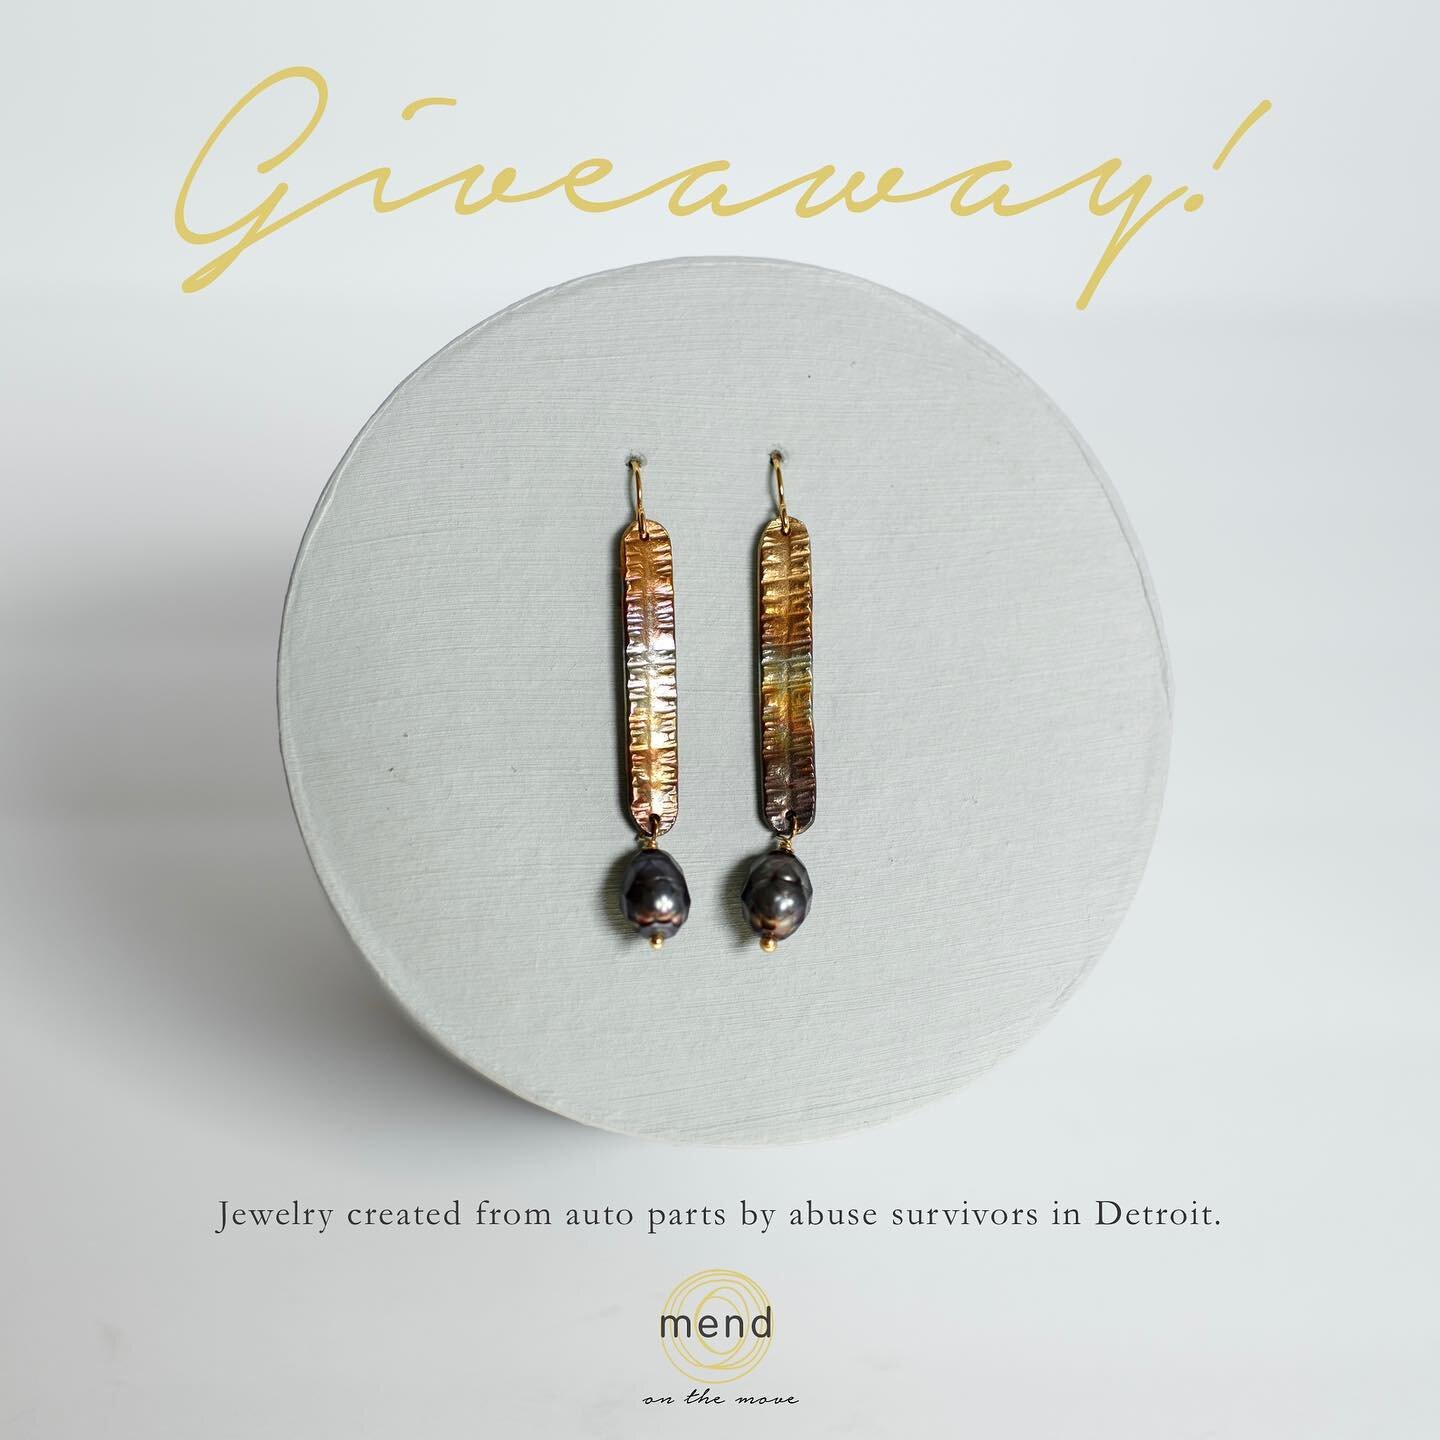 🎉 GIVEAWAY ALERT 🎉
We want to thank you for being a part of our community, and supporting our mission of empowering women who have survived abuse- making them  feel valued, gain confidence, find independence, and grow toward healing in a caring and